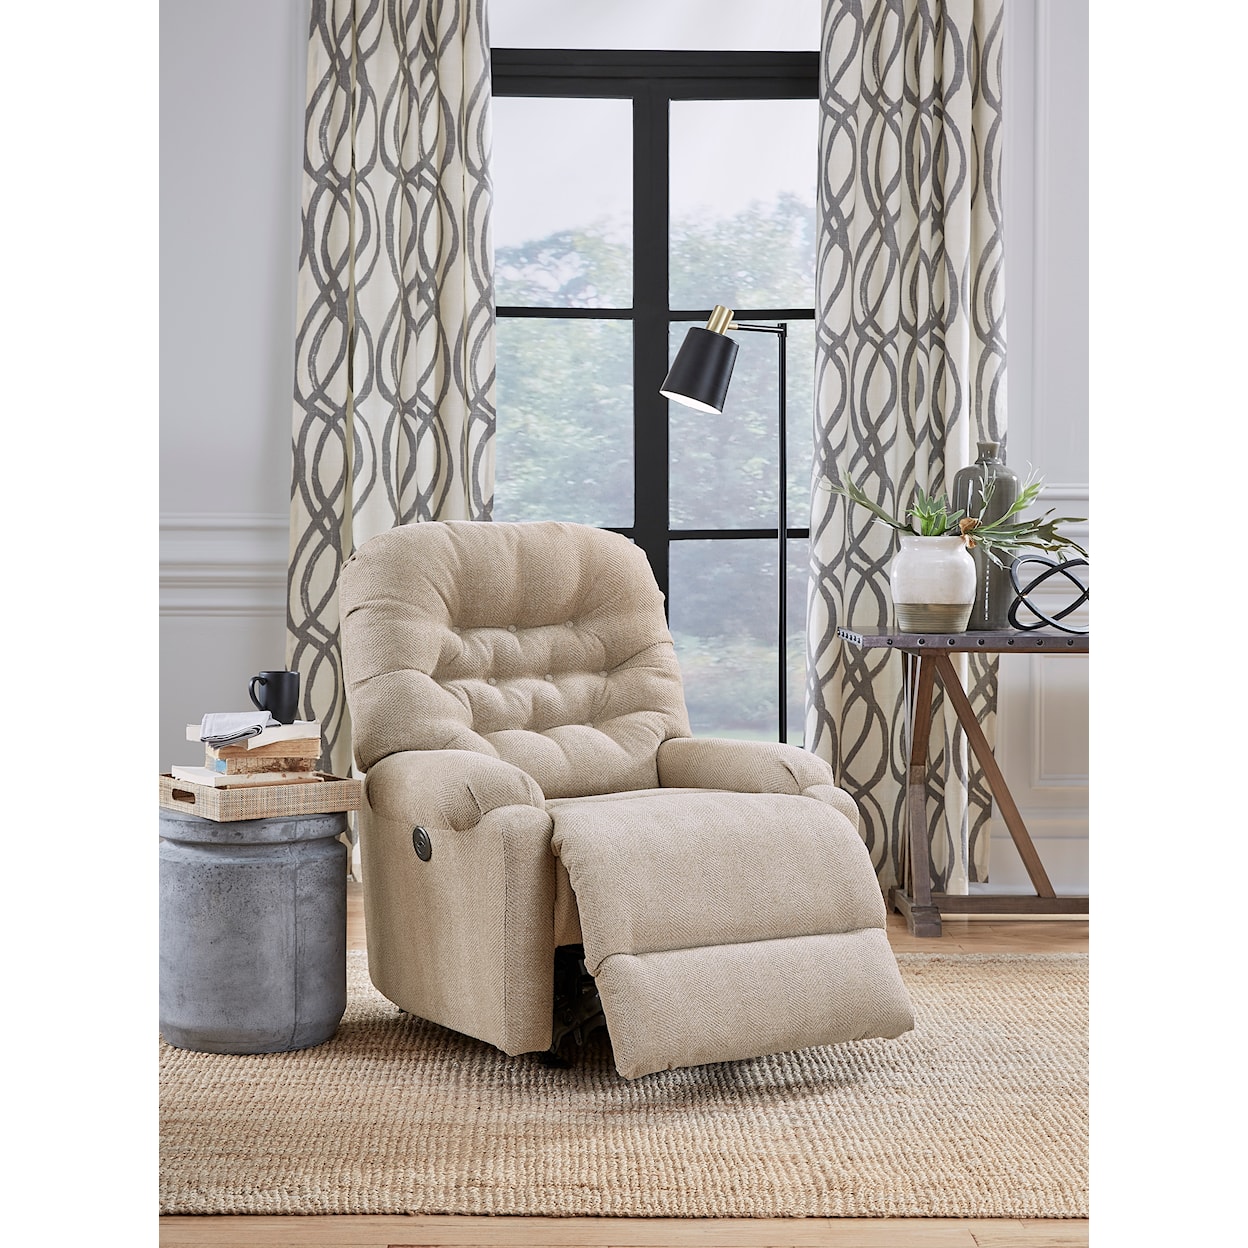 Best Home Furnishings Barb Space Saver Recliner